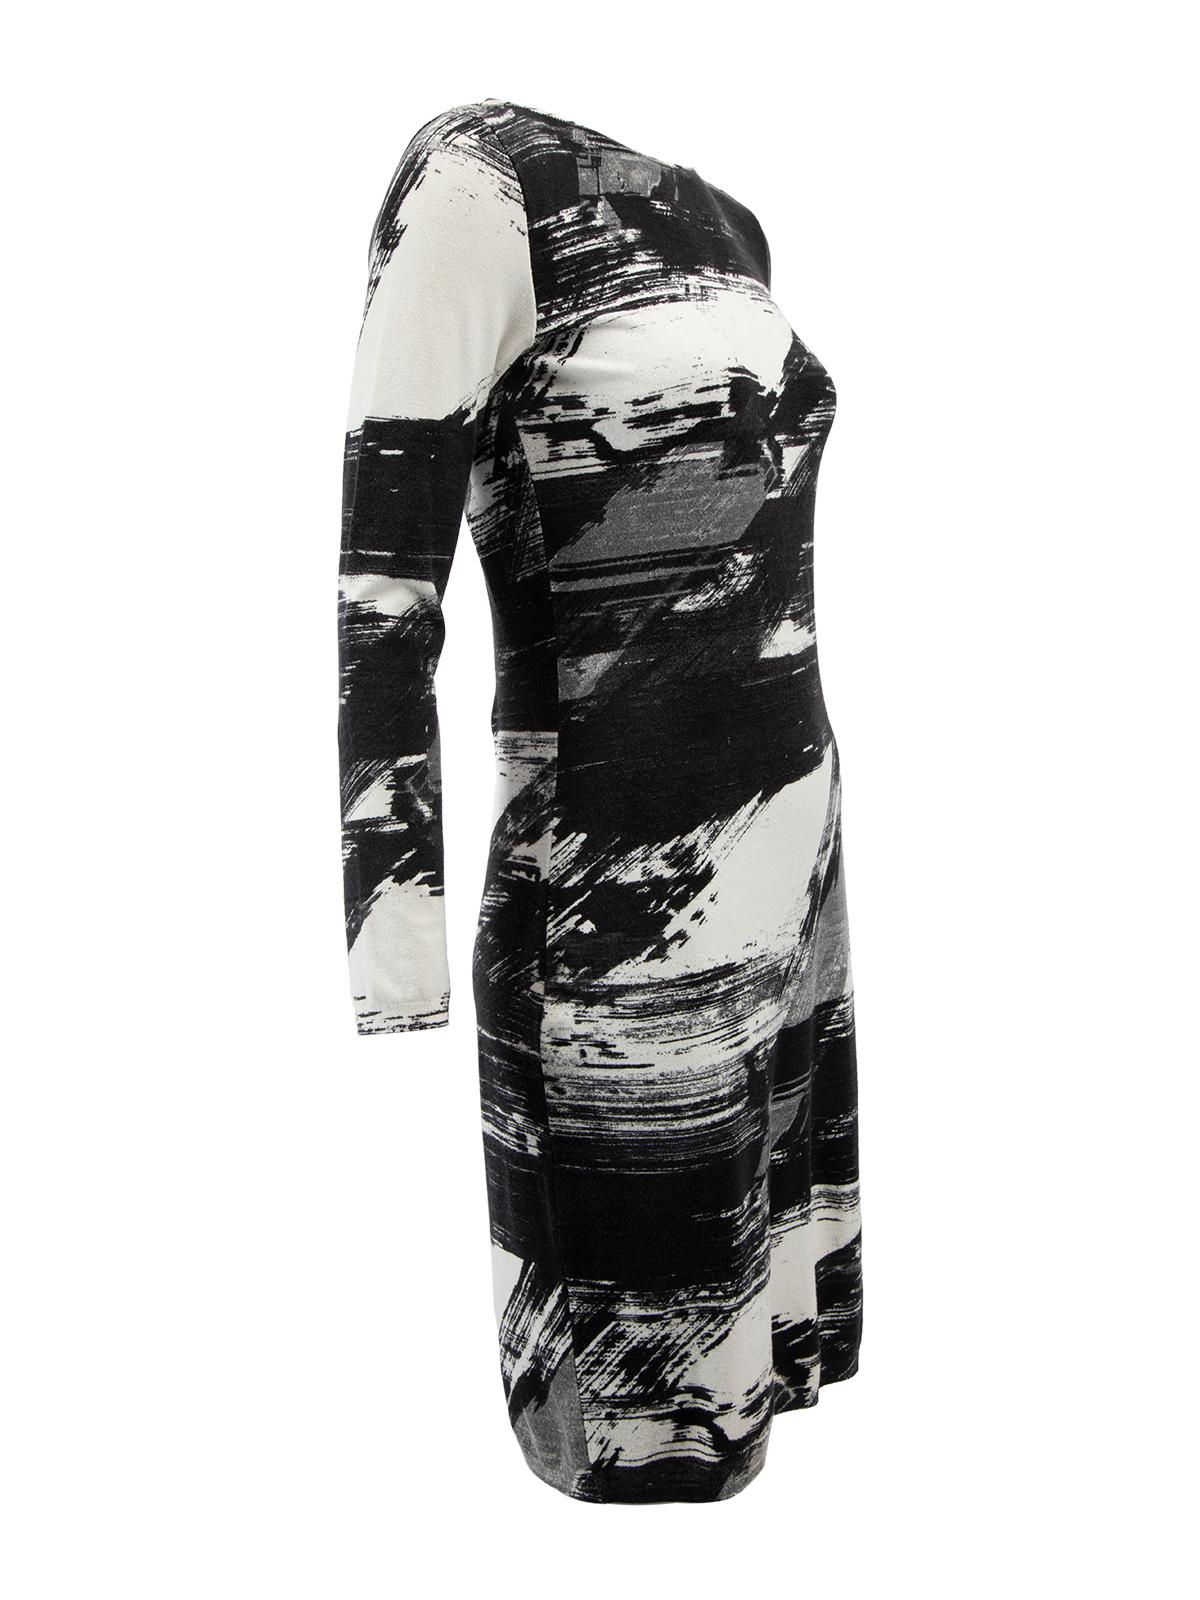 CONDITION is Very good. Hardly any visible wear to dress. Some pilling to fabric is evident on this used Blumarine designer resale item. Details Multicolour- Black, grey and white Viscose Bodycon dress Mini length Long sleeves Round neckline